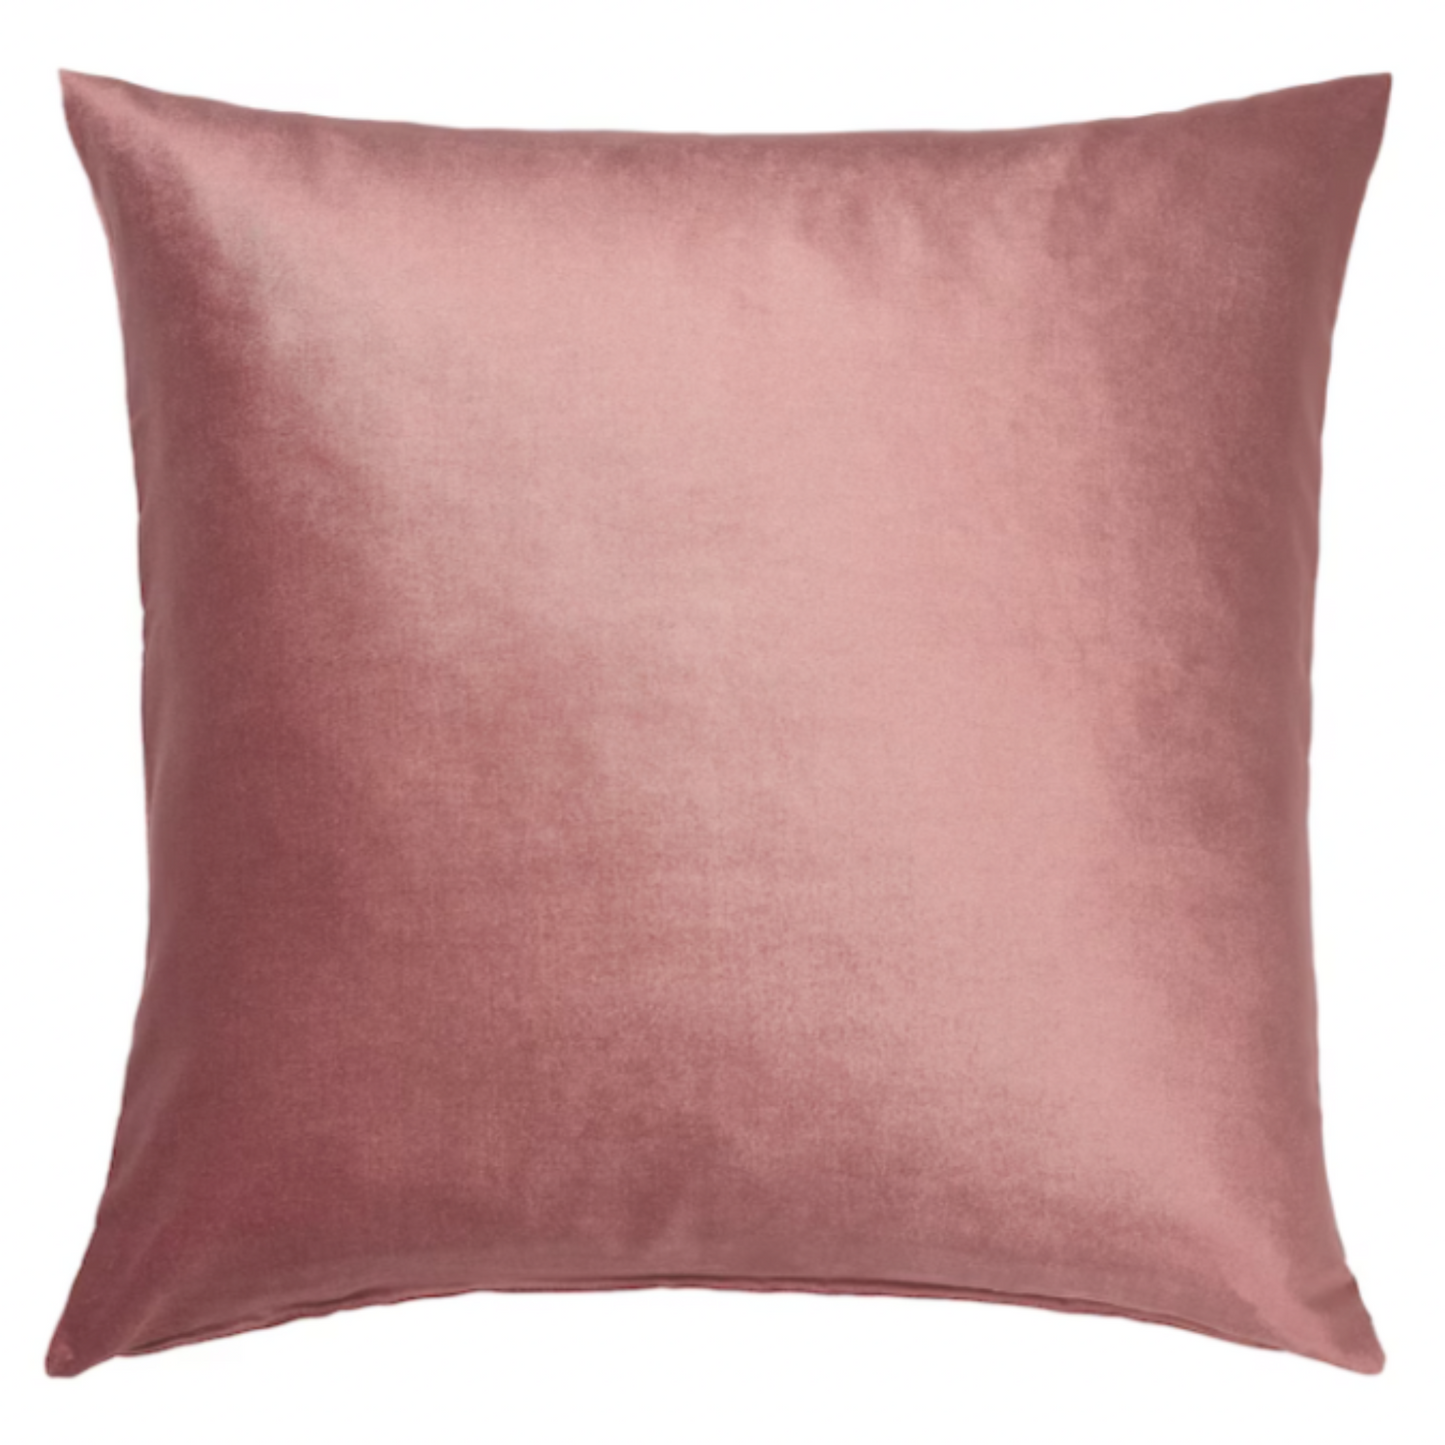 IKEA Lappvide Cushion Cover 50x50cm, Old Rose (6784395509825)